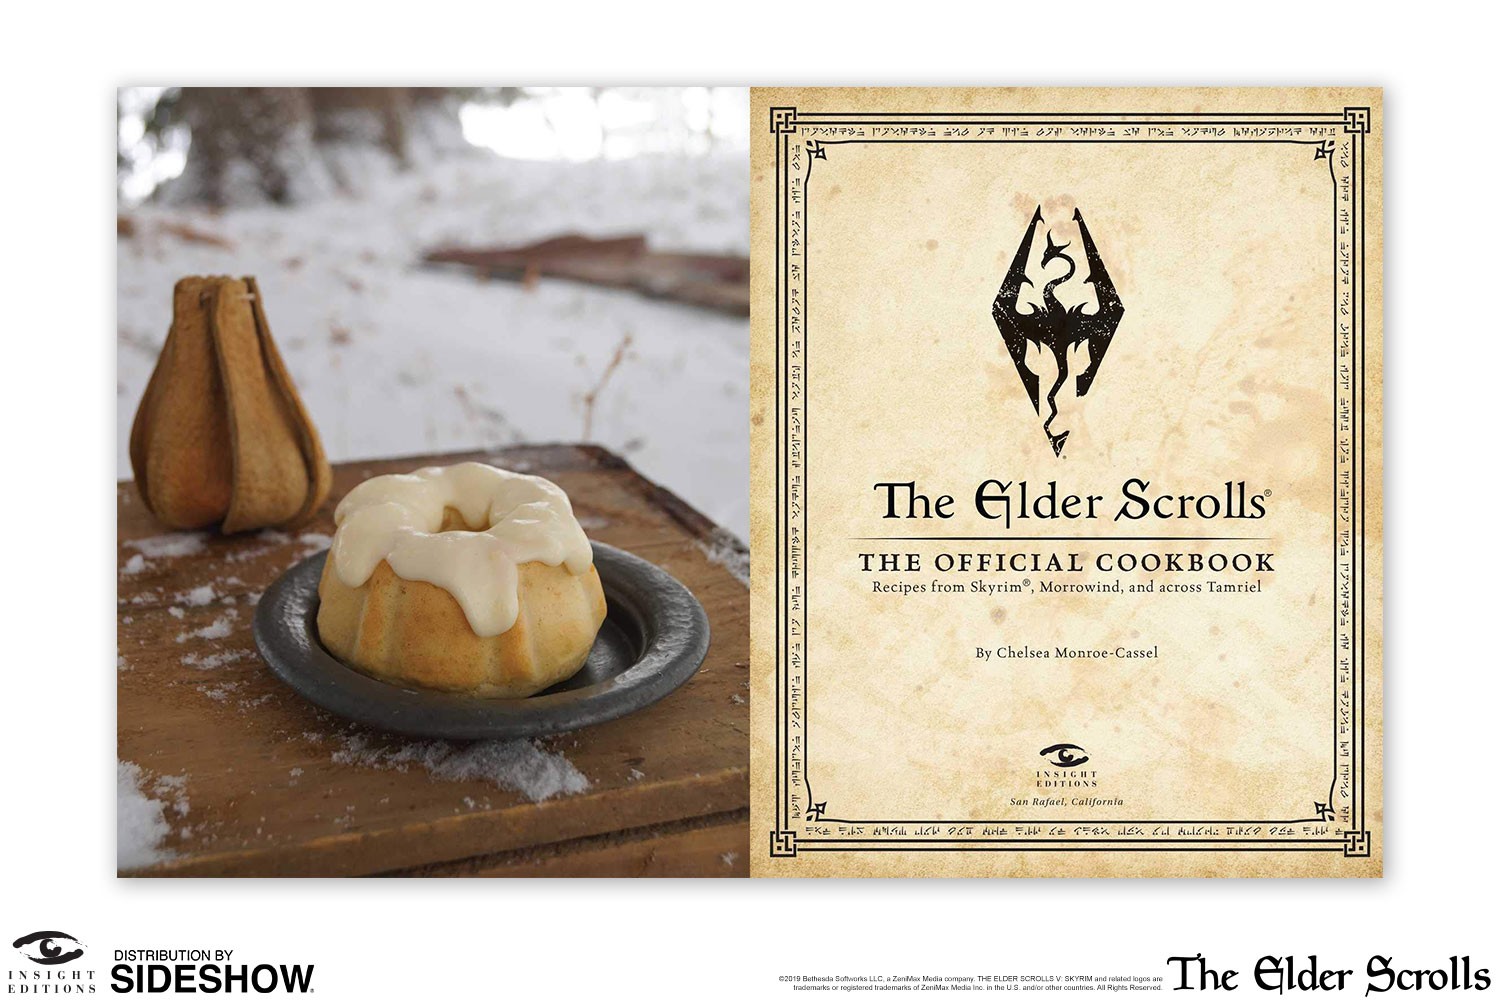 The Elder Scrolls: The Official Cookbook Collector Edition - Prototype Shown